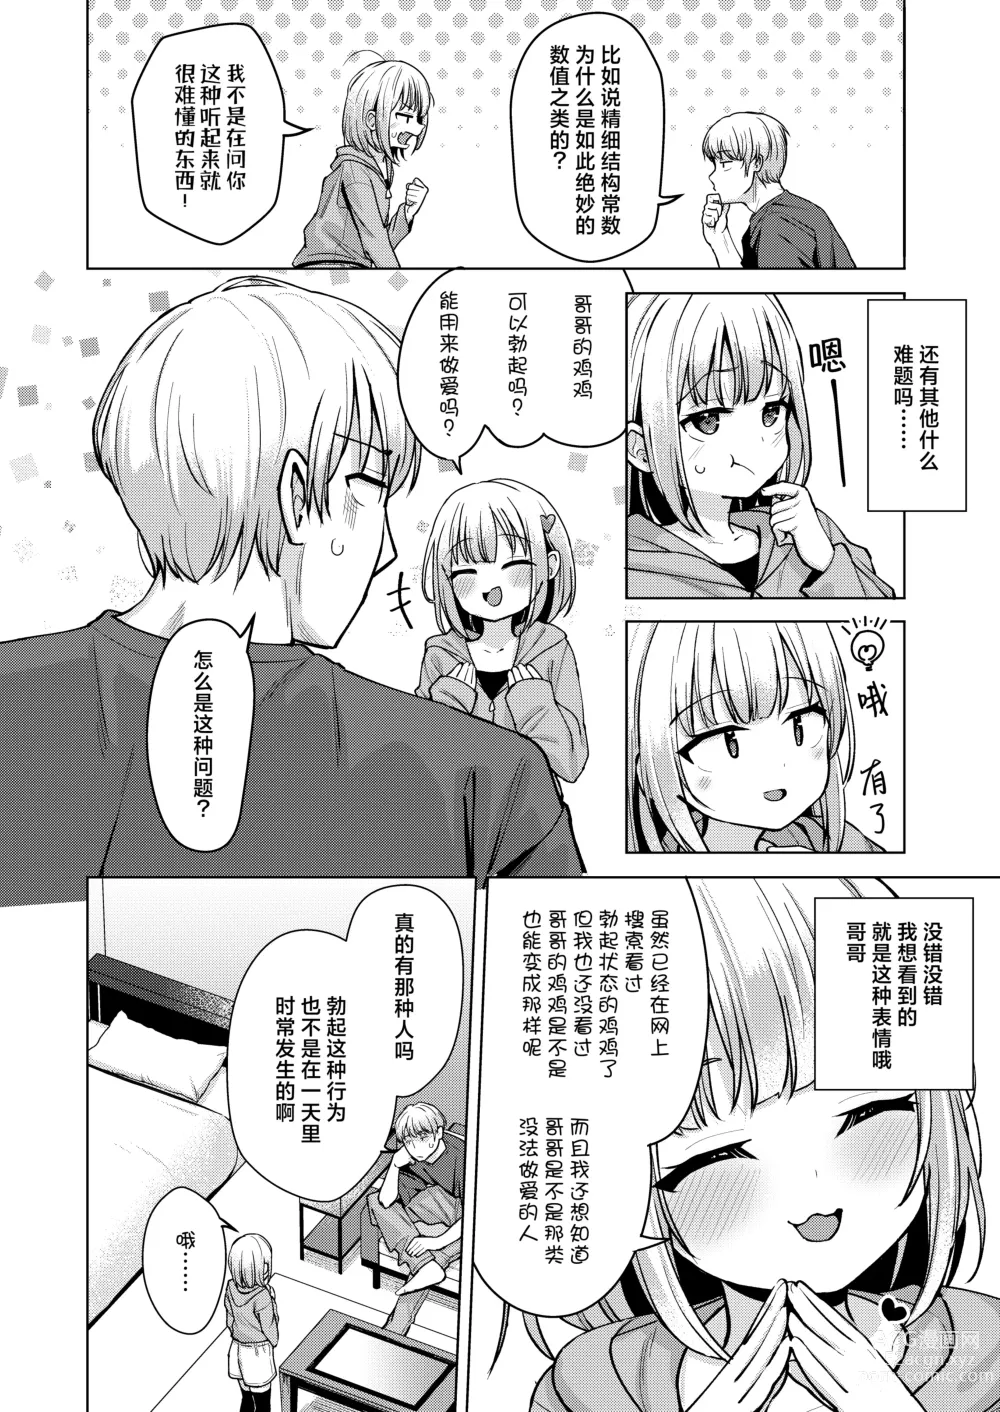 Page 6 of doujinshi 邪心妹妹真是太棒了